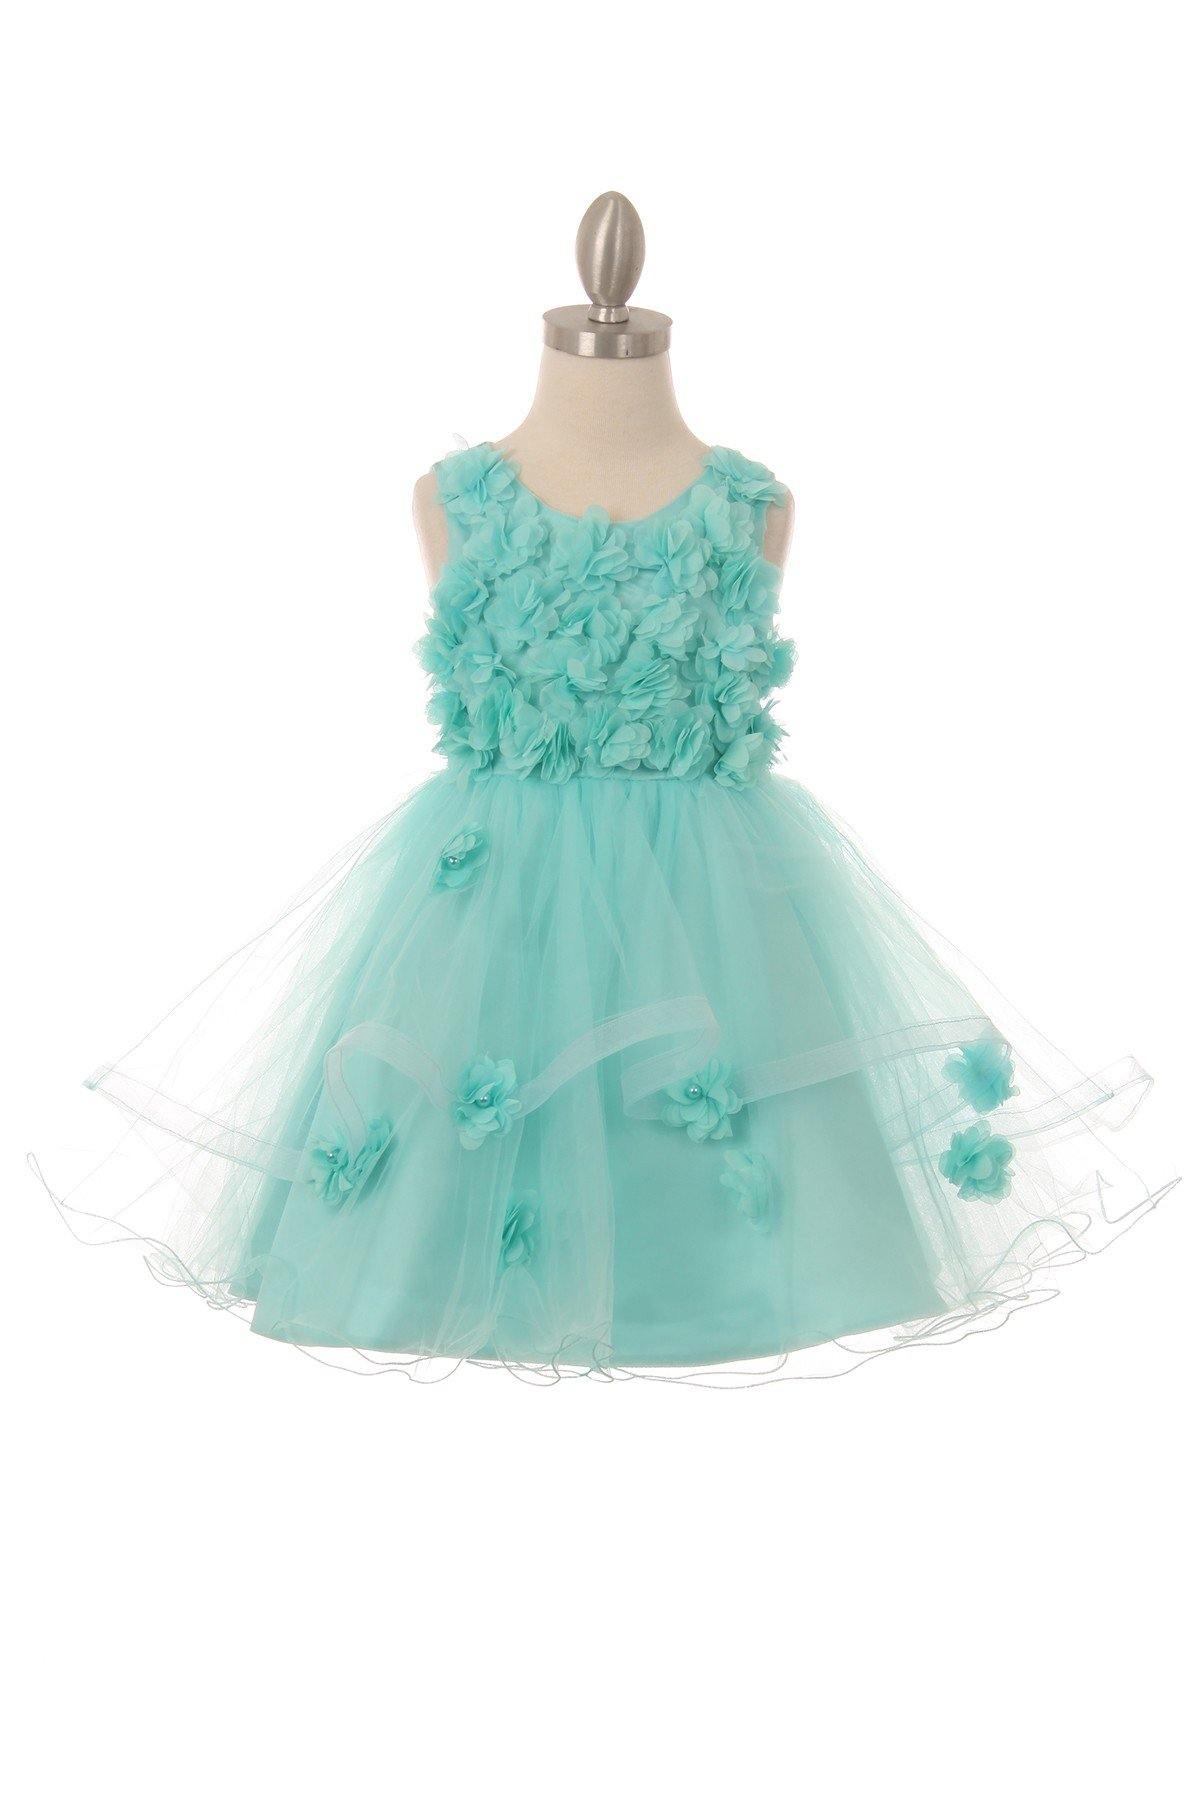 Sleeveless Embellished Short Party Flower Girls Dress - The Dress Outlet Cinderella Couture